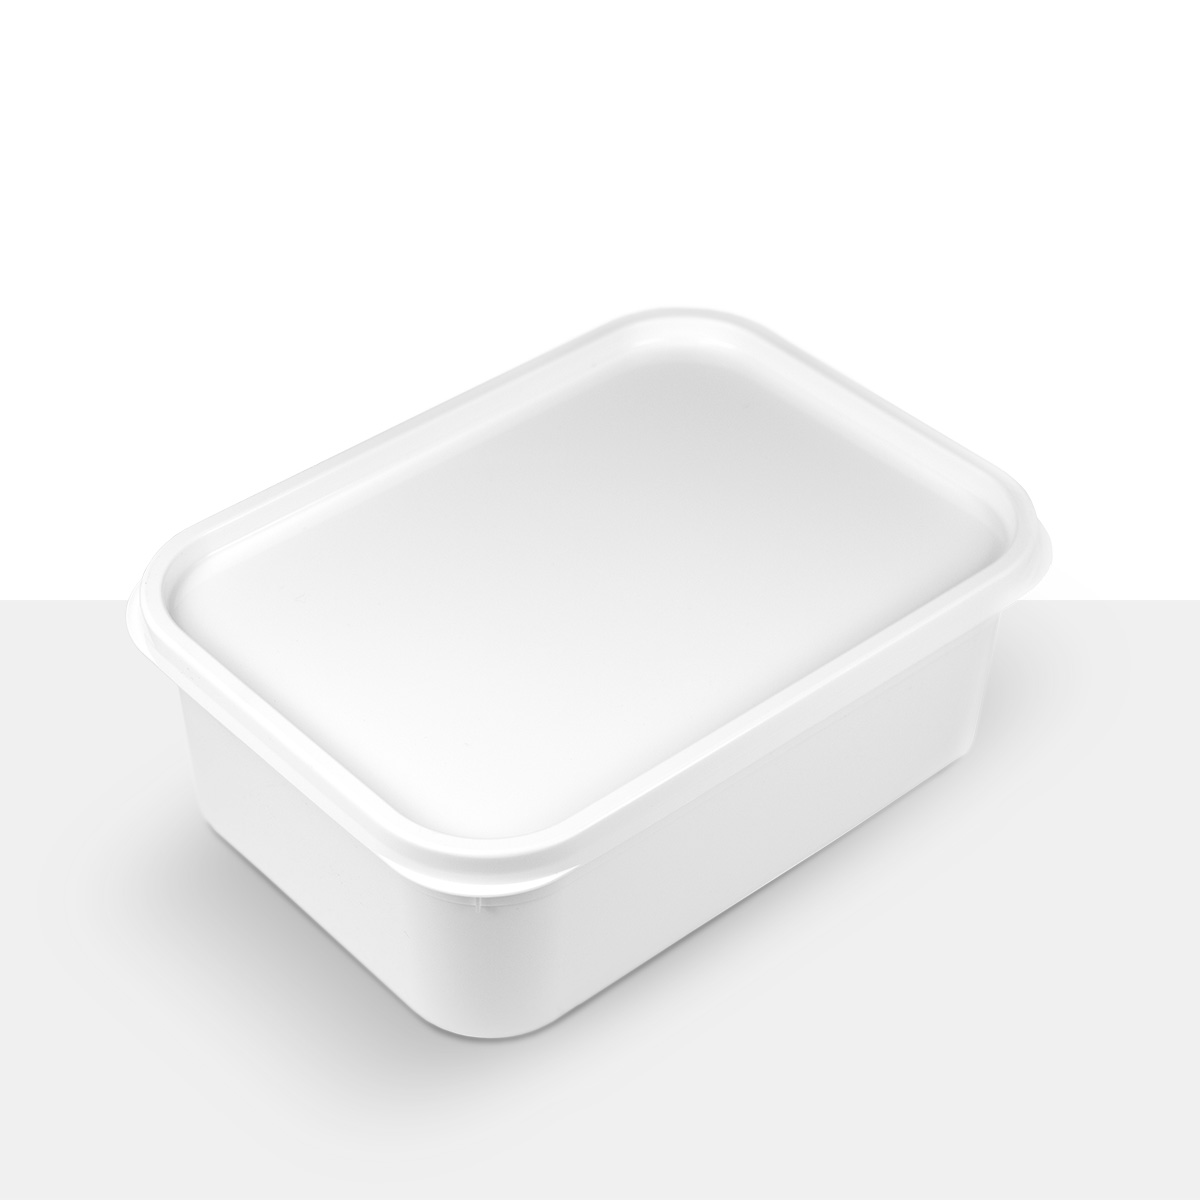 Northern Ireland, Scotland Food containers 2 Litre Rectangular Ice Cream Tubs